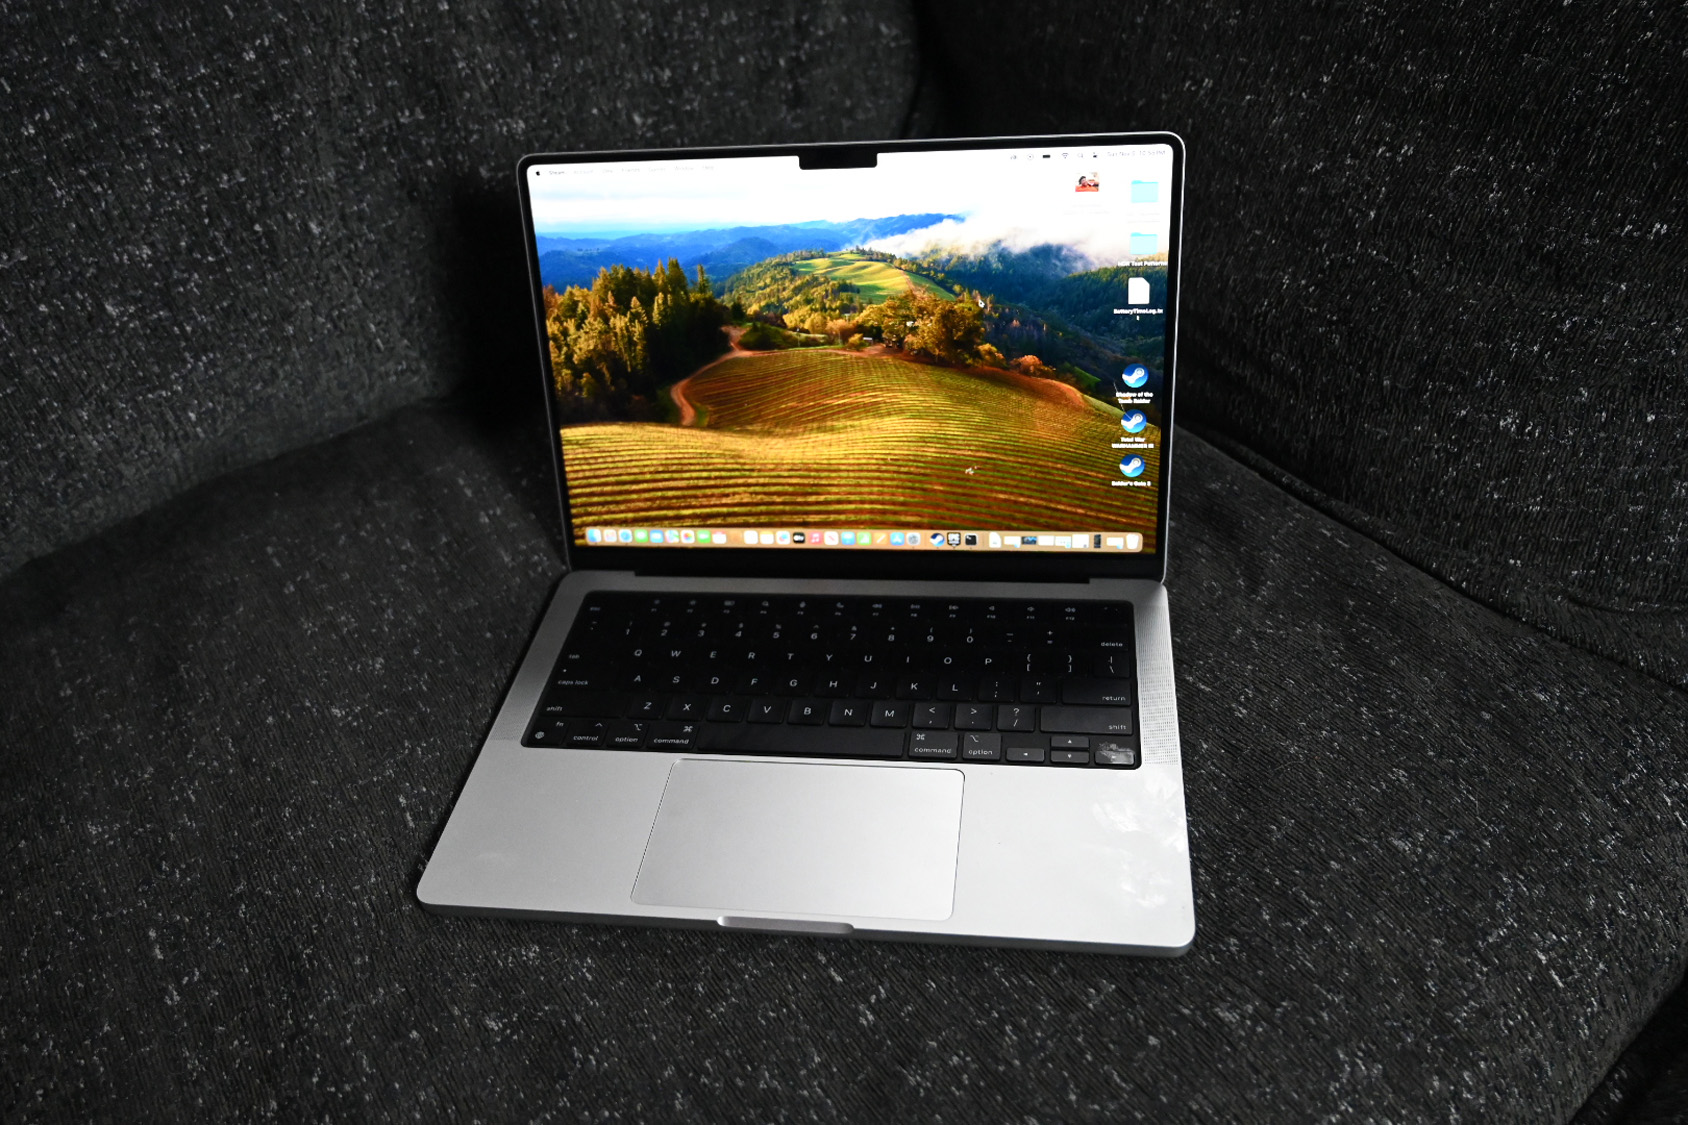 Still time to catch the 2023 MacBook Pro M3 at only $1,399